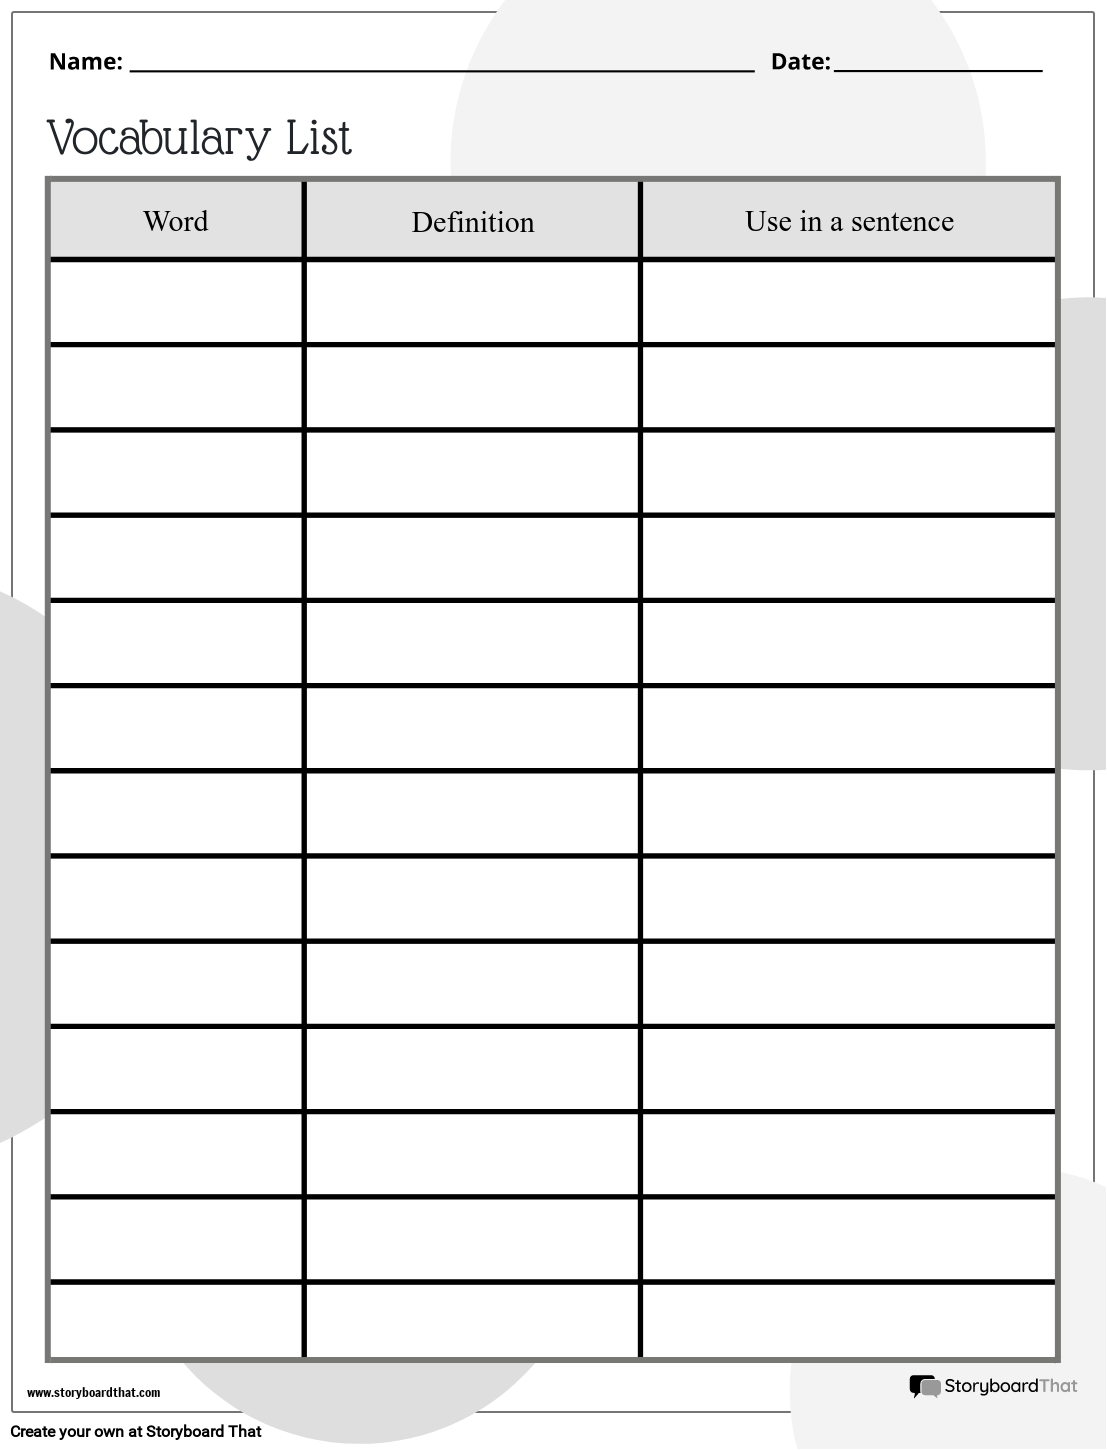 Free Vocabulary Worksheet Templates at StoryboardThat